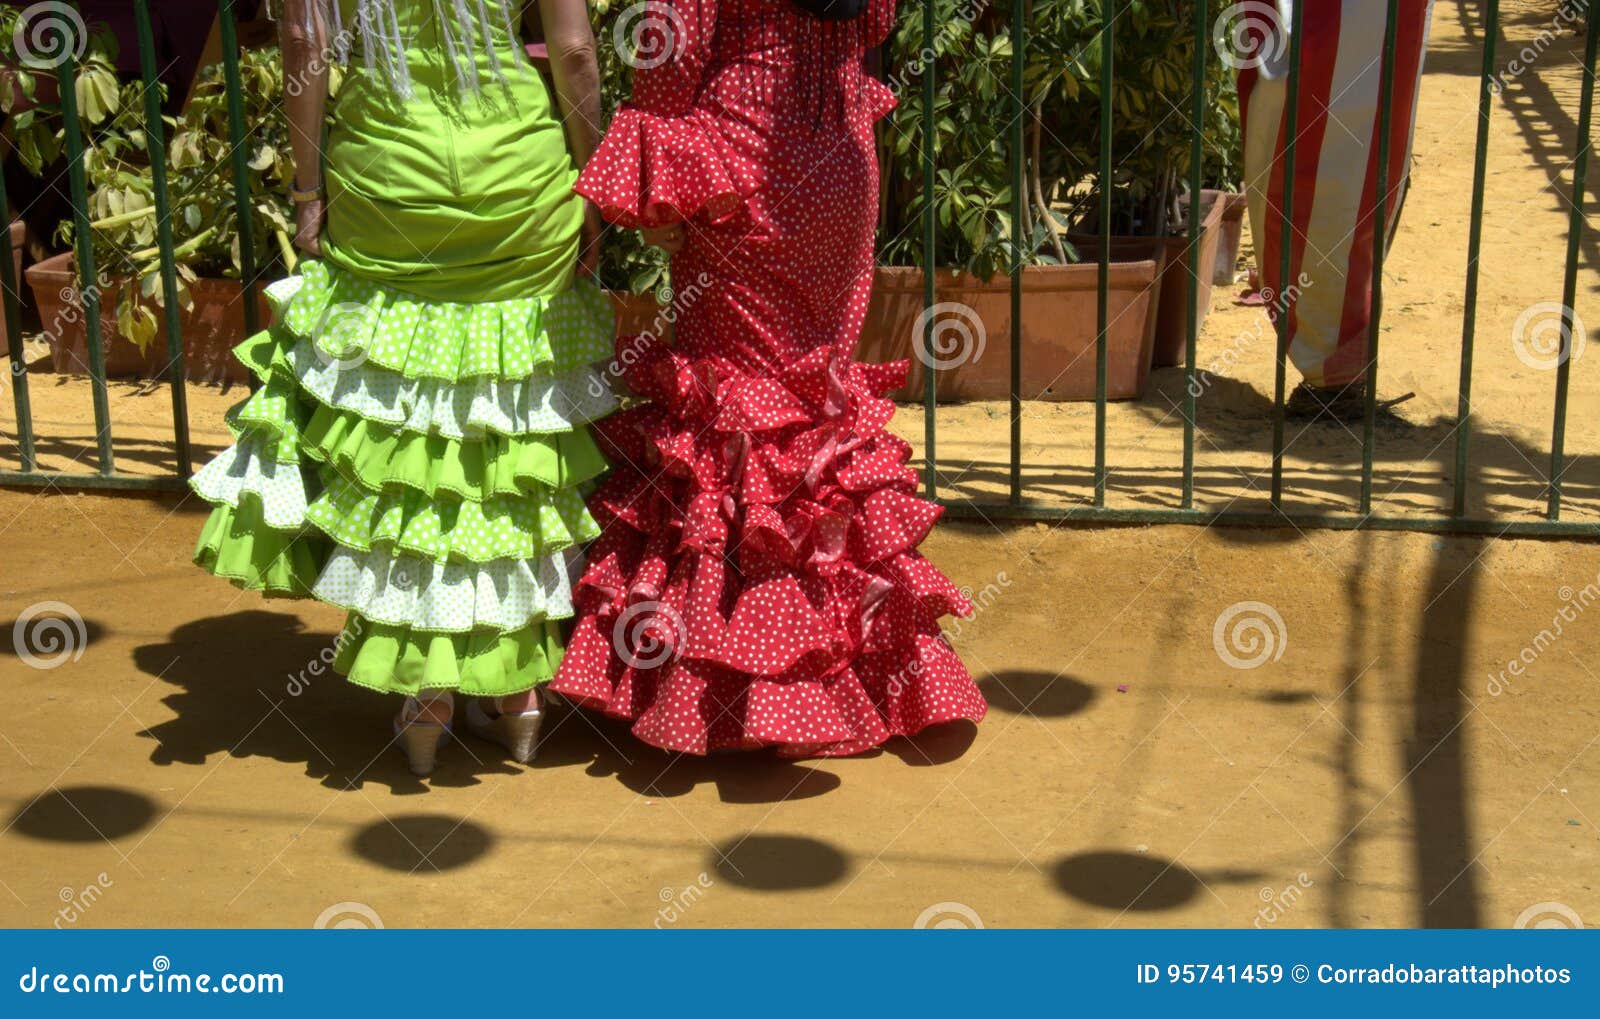 the colorful gypsy dresses of flamenco